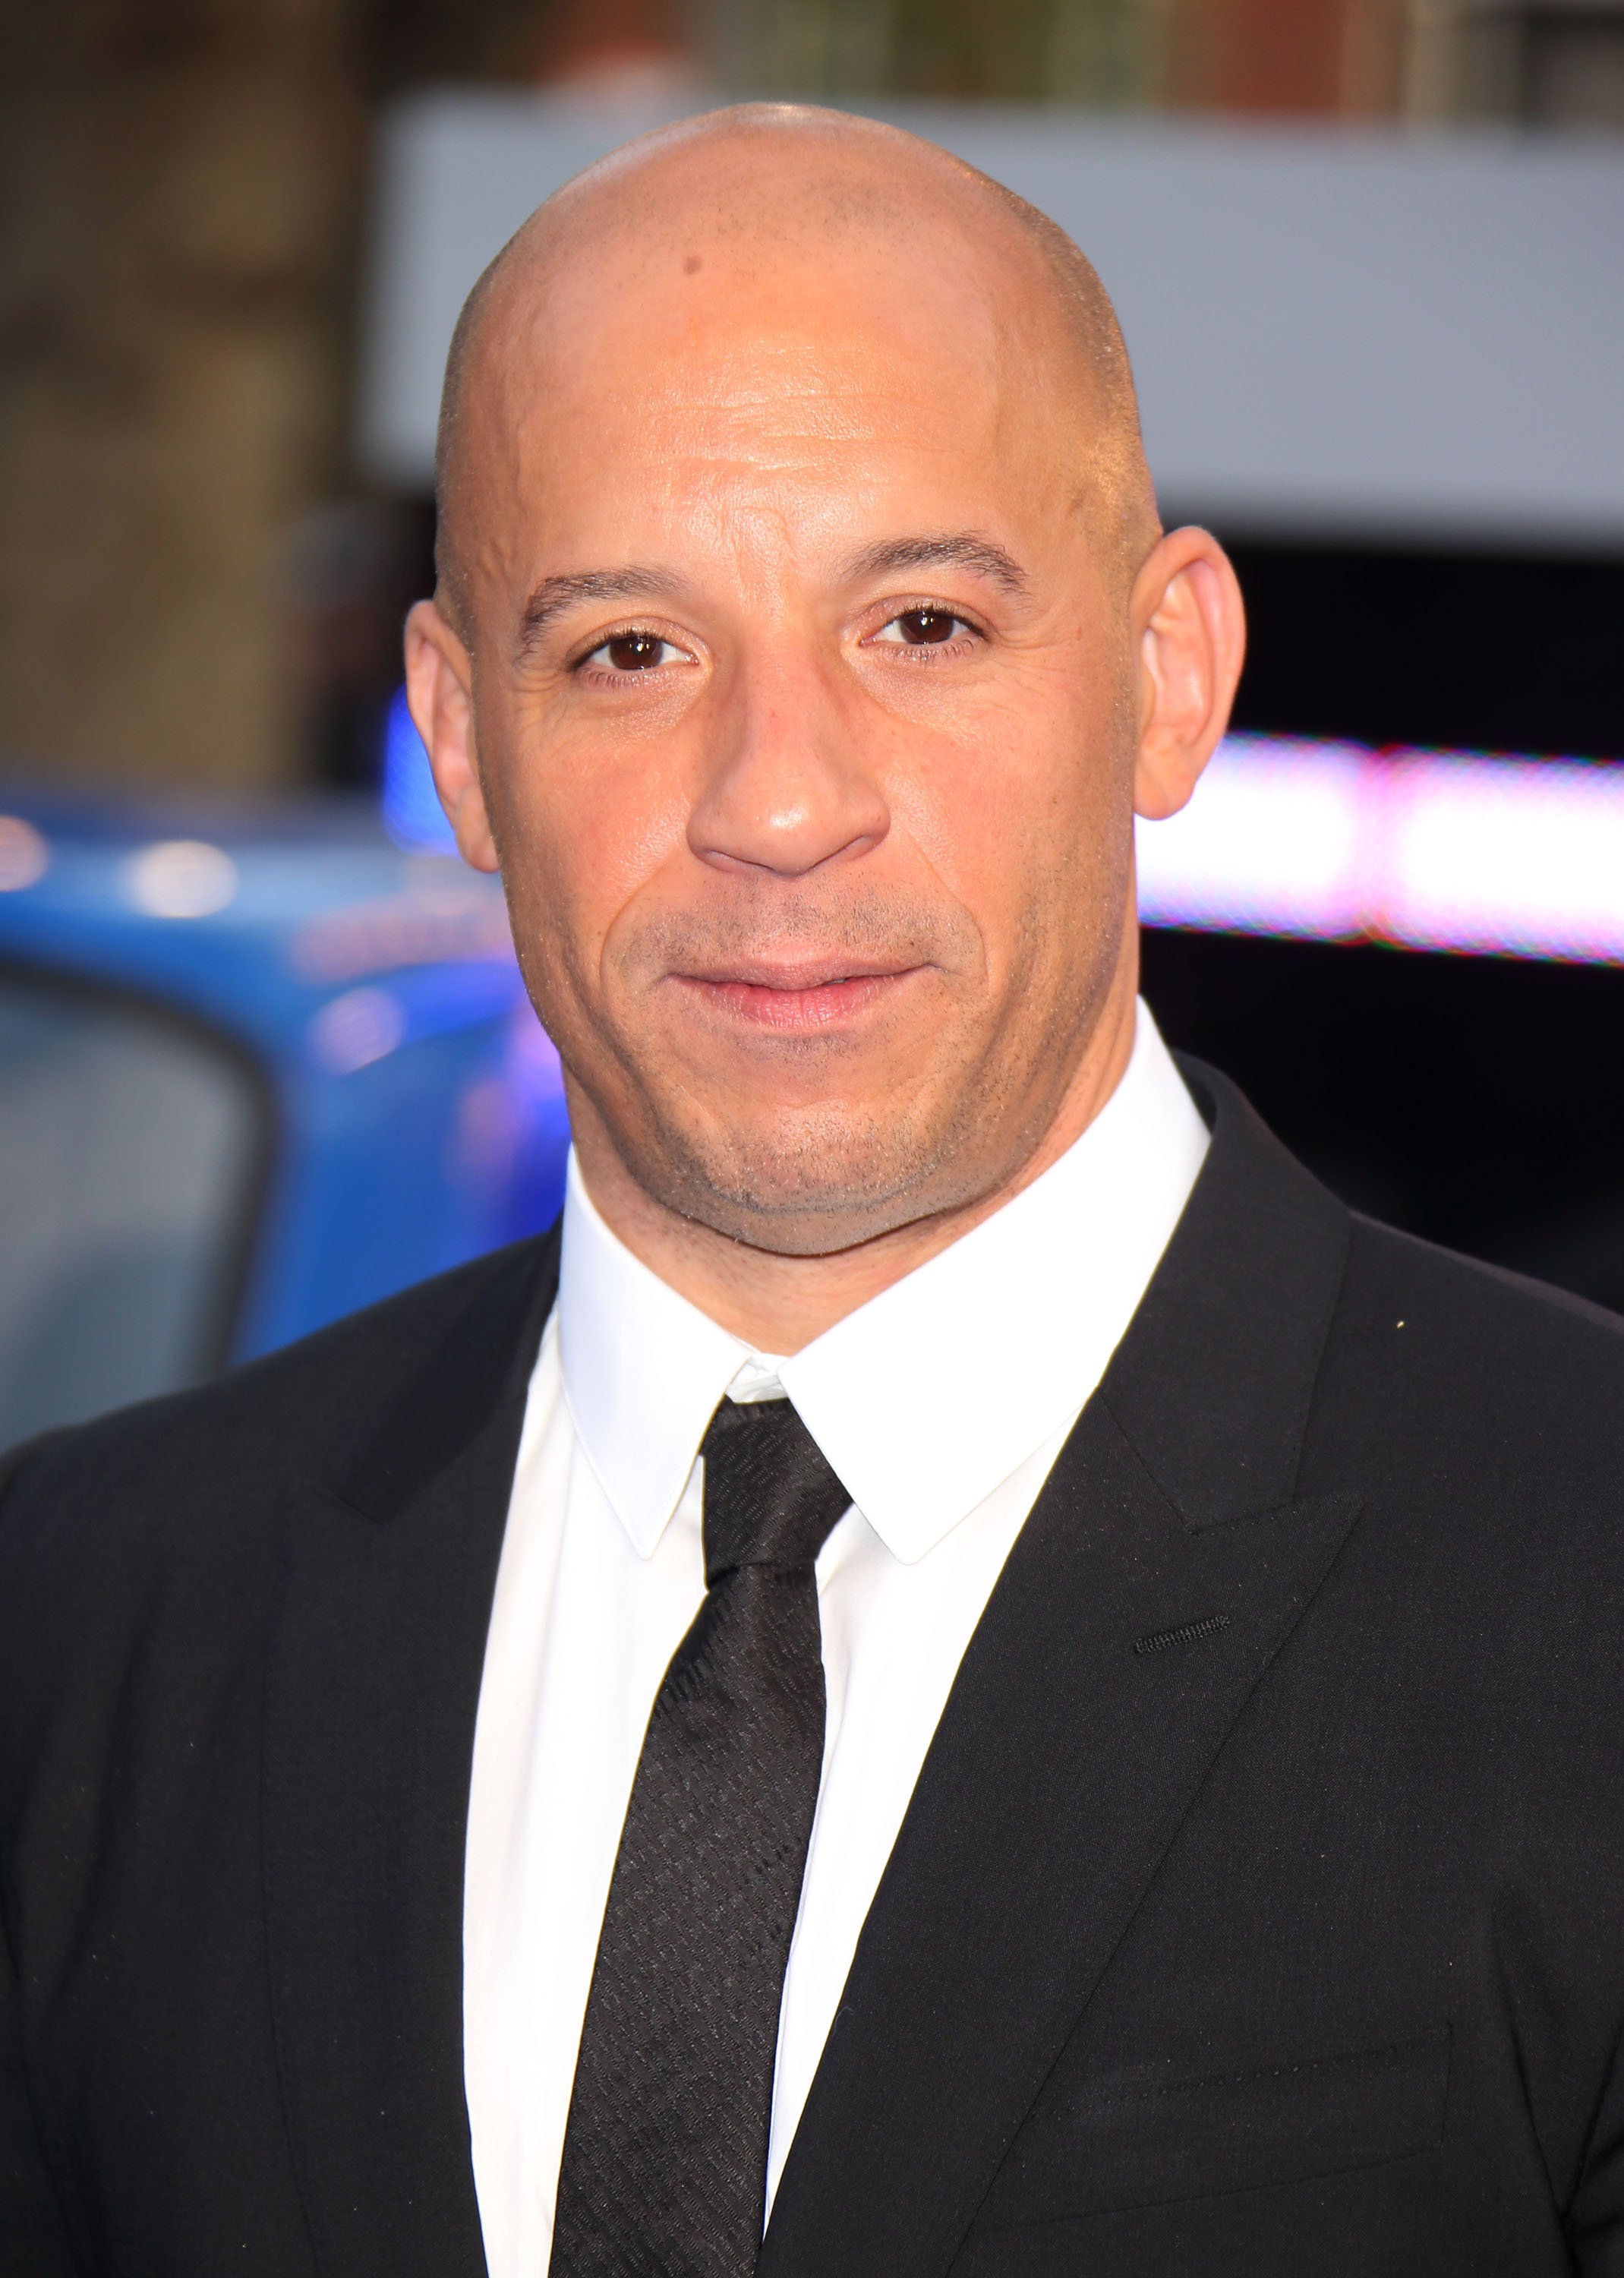 Vin Diesel at the world premiere of "Fast & Furious 6" at Empire Leicester Square on May 7, 2013, in London, England. | Source: Getty Images